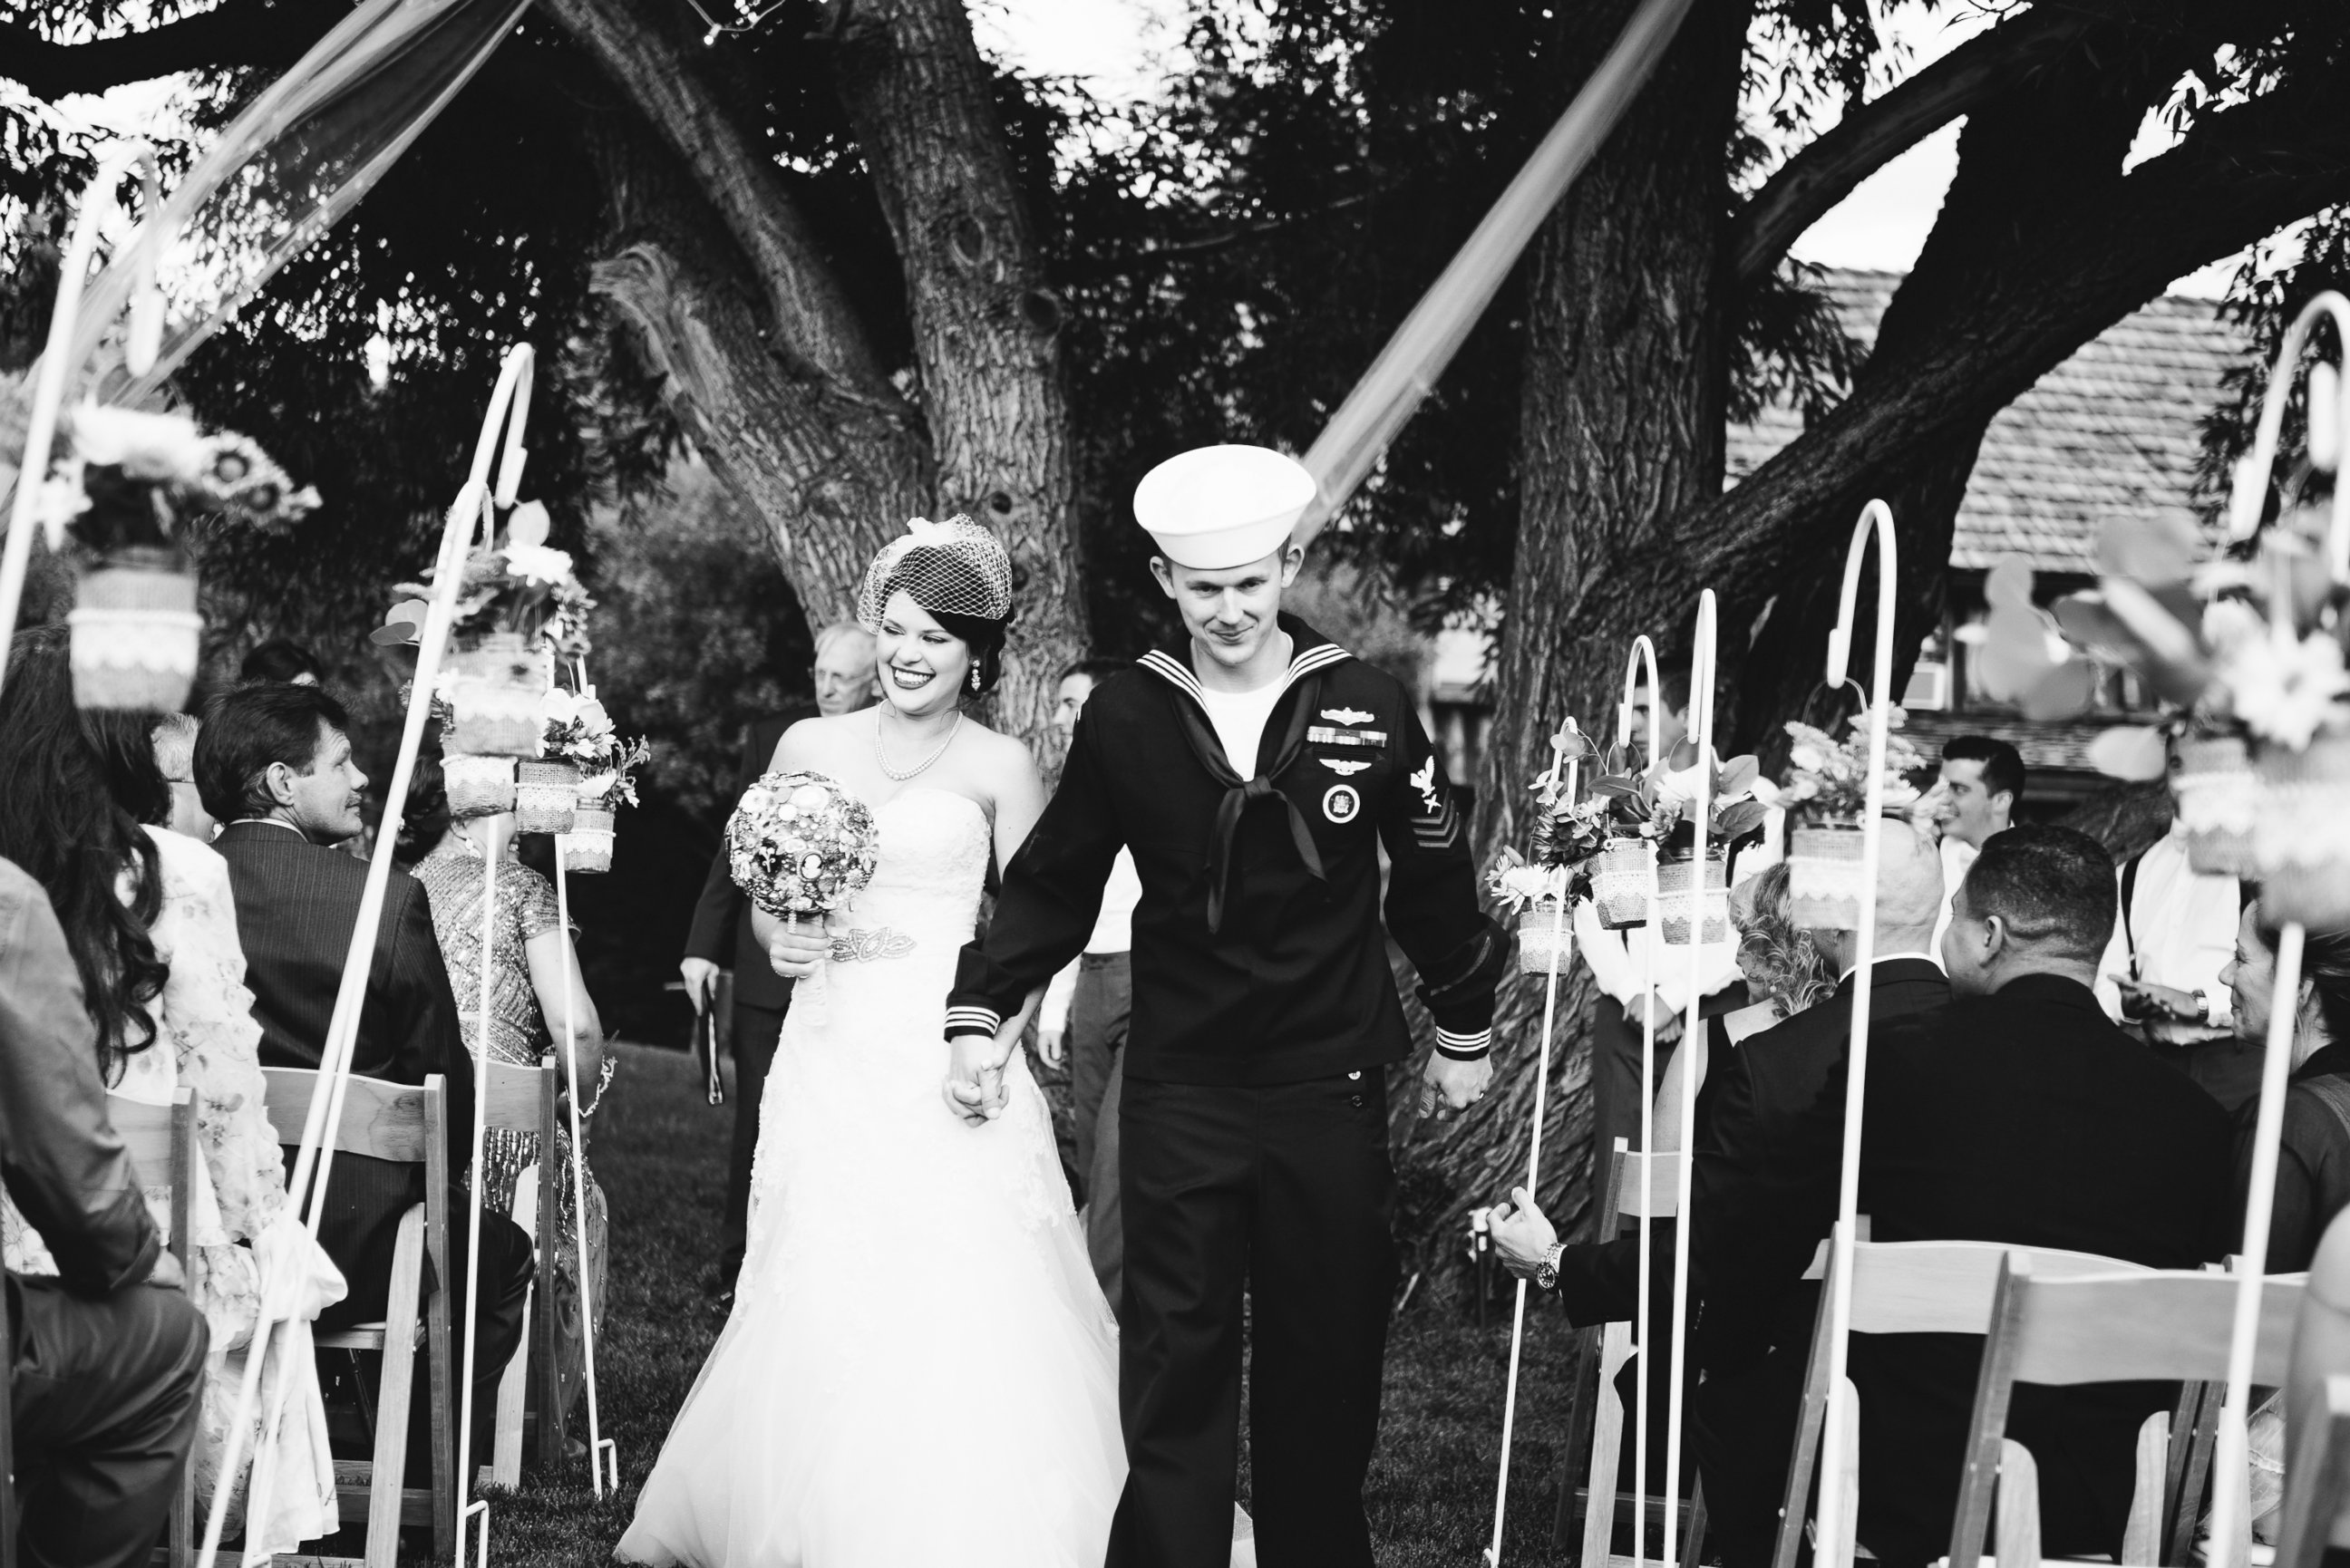 PHOTO: Joshua Bundy, a petty officer first class in the Navy, and his new bride Lacy Wilkinson, both 25, planned a new wedding in a day, with help from "Save My Colorado Wedding," after their Colorado venue was washed out.